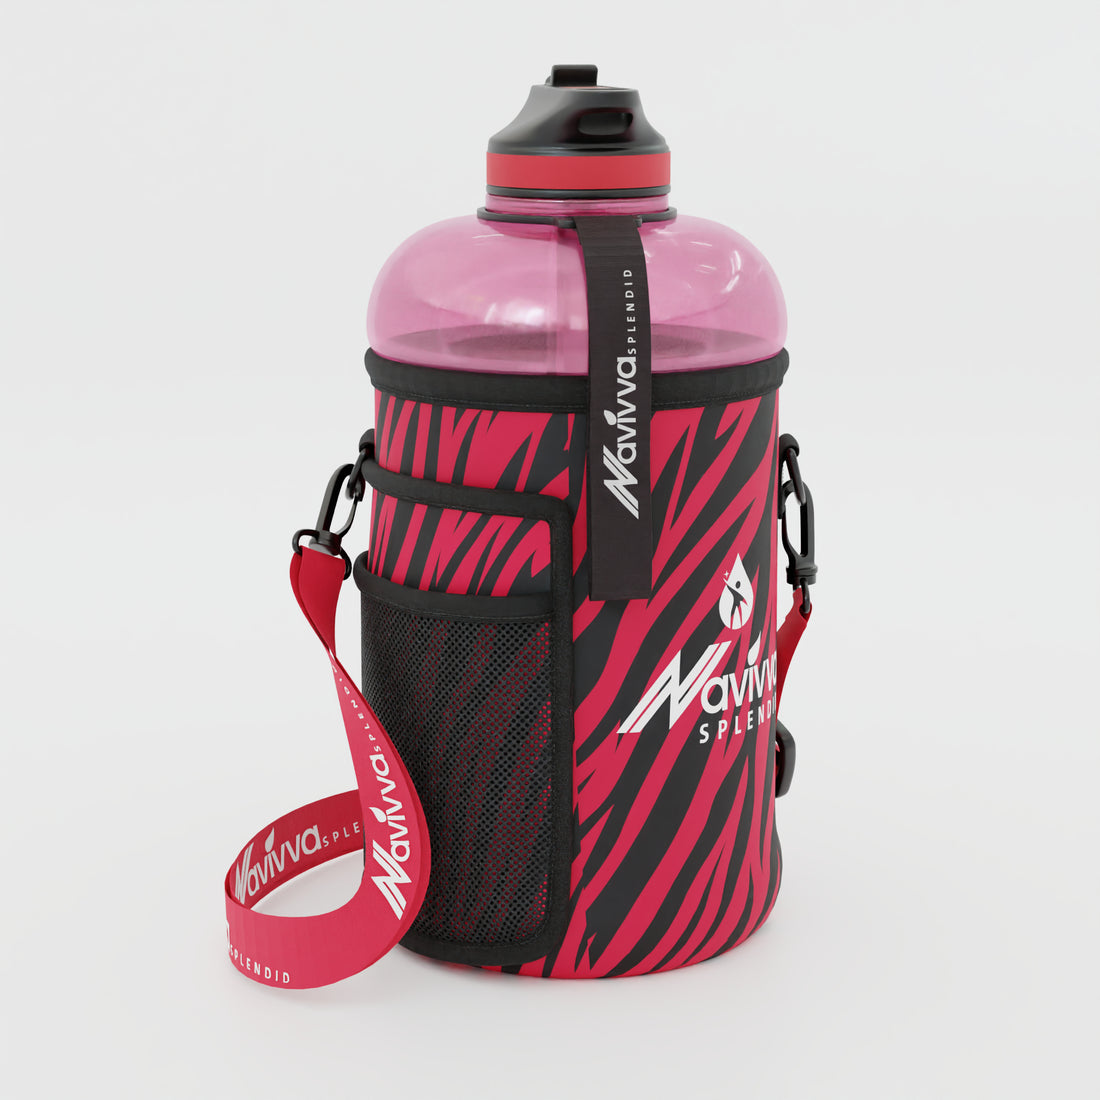 2.2 Litre Water Bottle with Sleeve